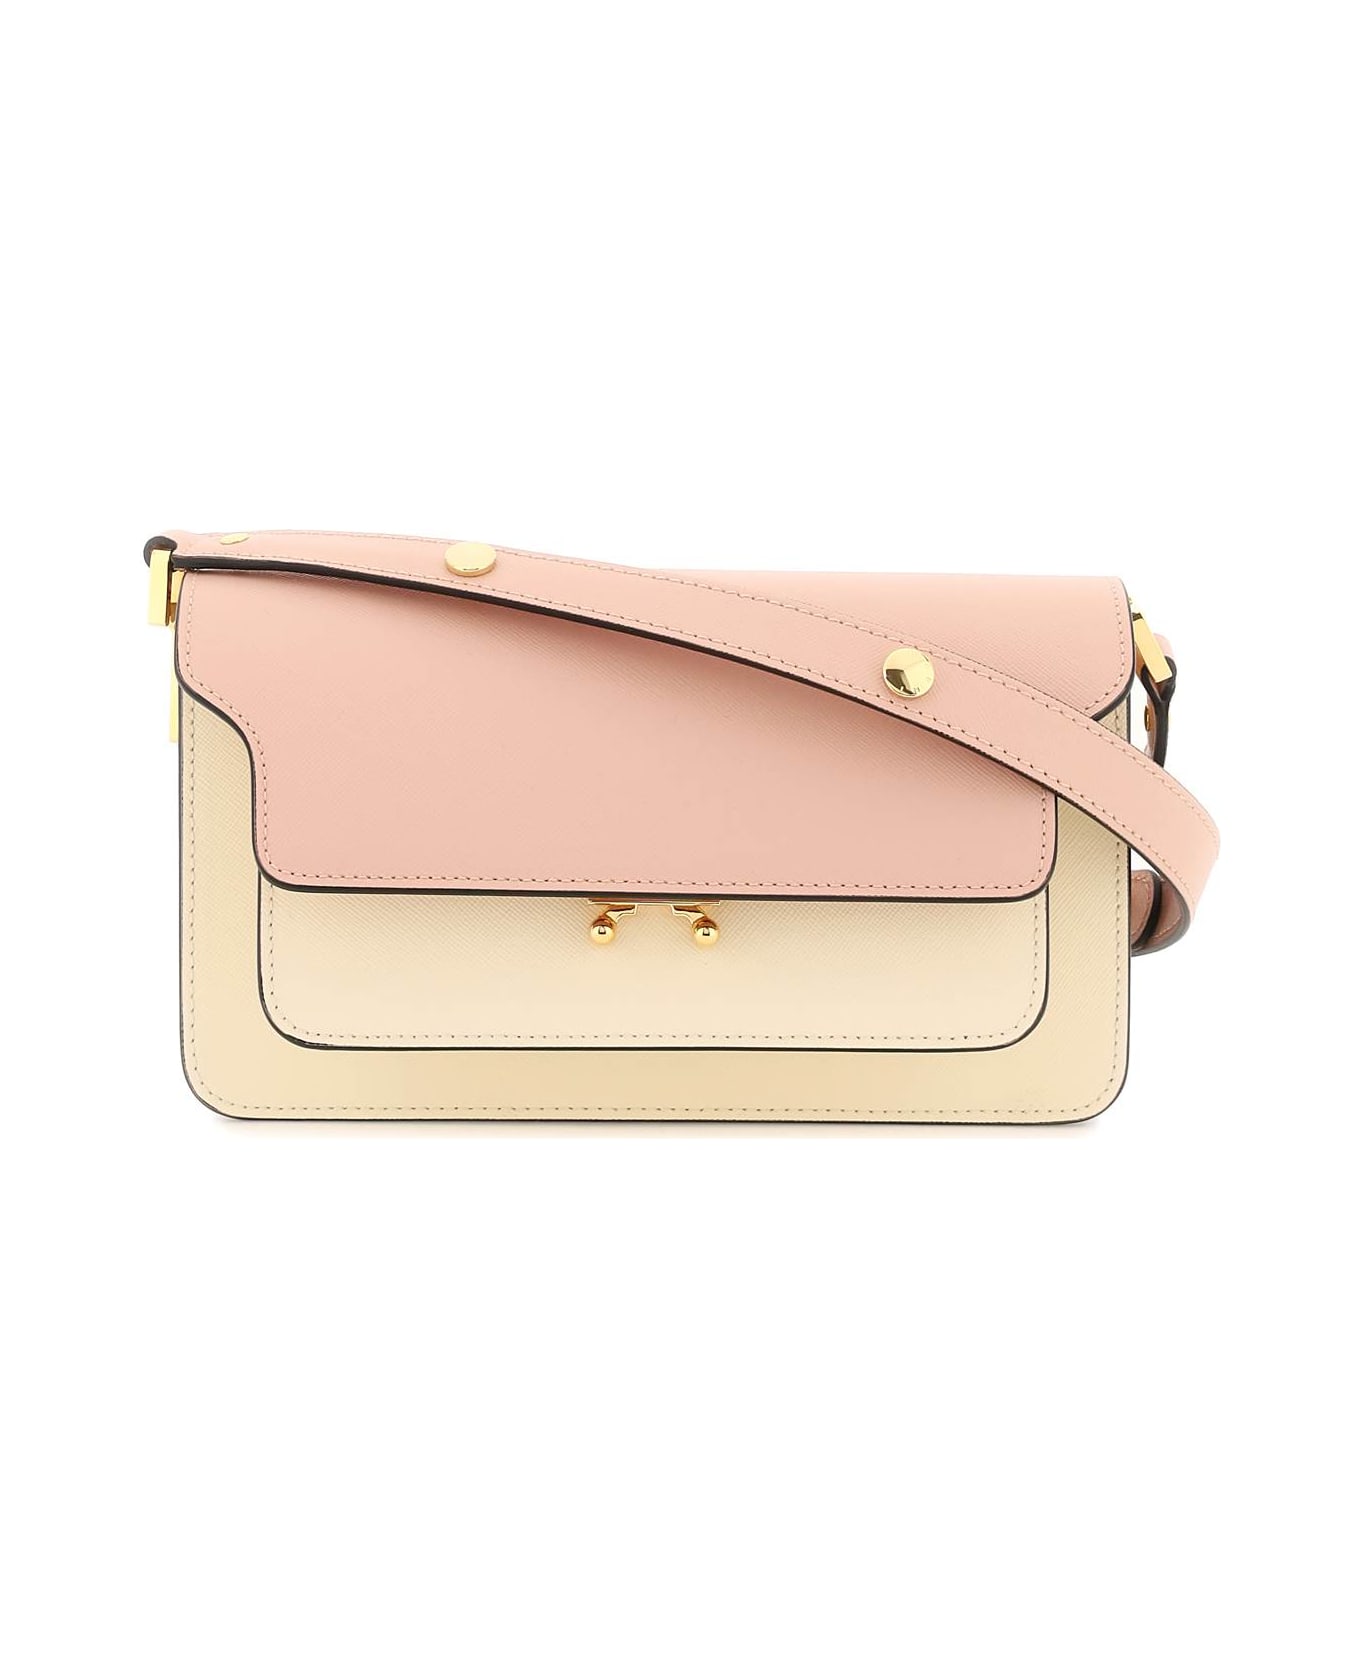 Marni Tricolour Leather Trunk East-west Bag - CAMELLIA TALC NATURAL (Pink)